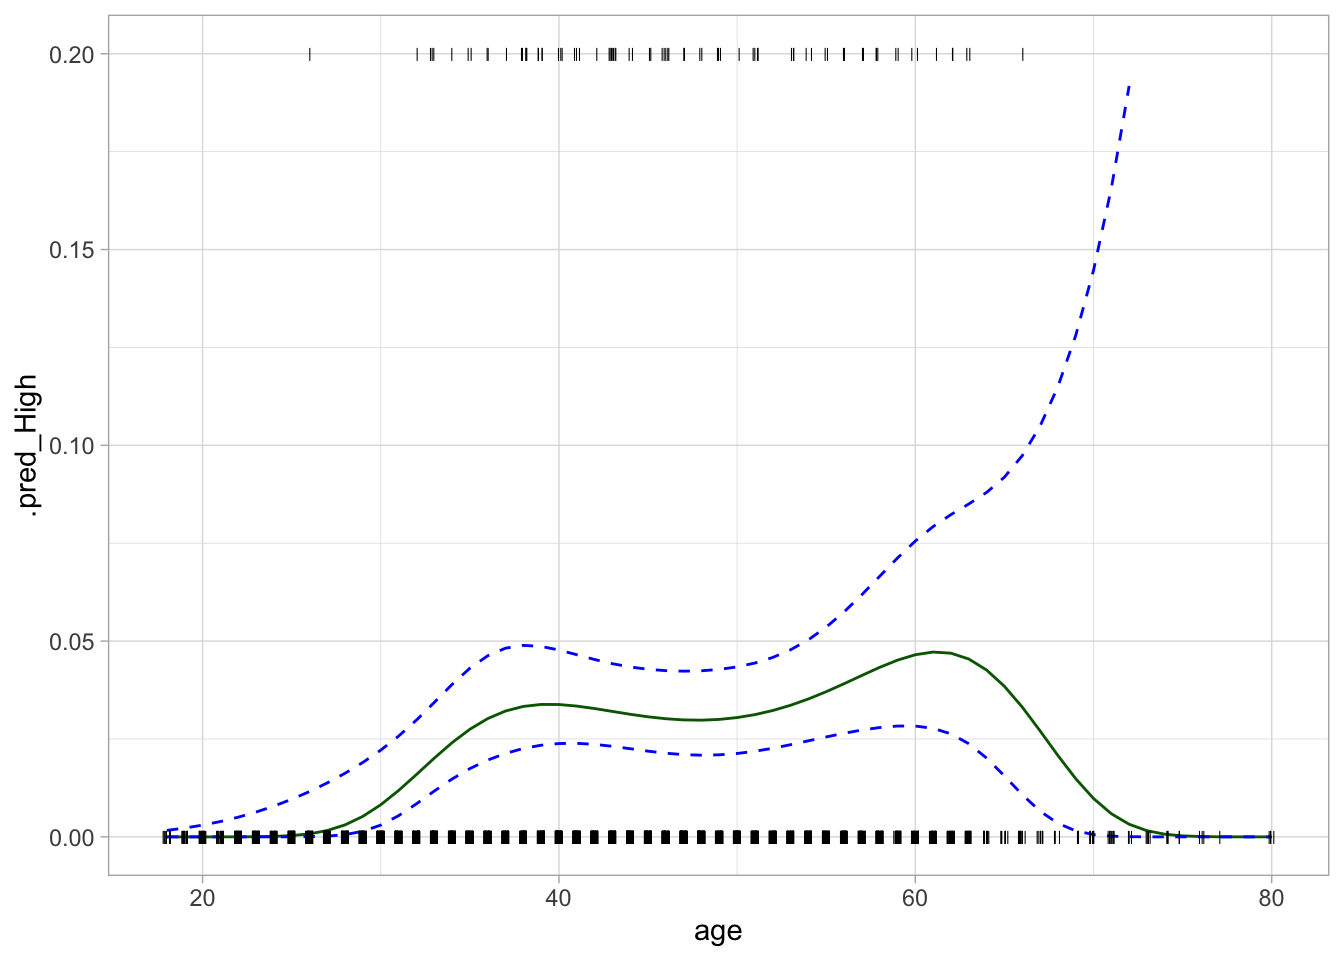 Line chart with age on the x-axis and .pred_High on the y-axis. The green curve starts at zero for low values age. A local maxima is seen at 35 and 60. Curve goes back to zero around 80. Two blue dotted lines representing the confidence interval around the green curve. This confidence interval is around 1% away from the green curve excepts when age is larger than 60, where it quickly widens.